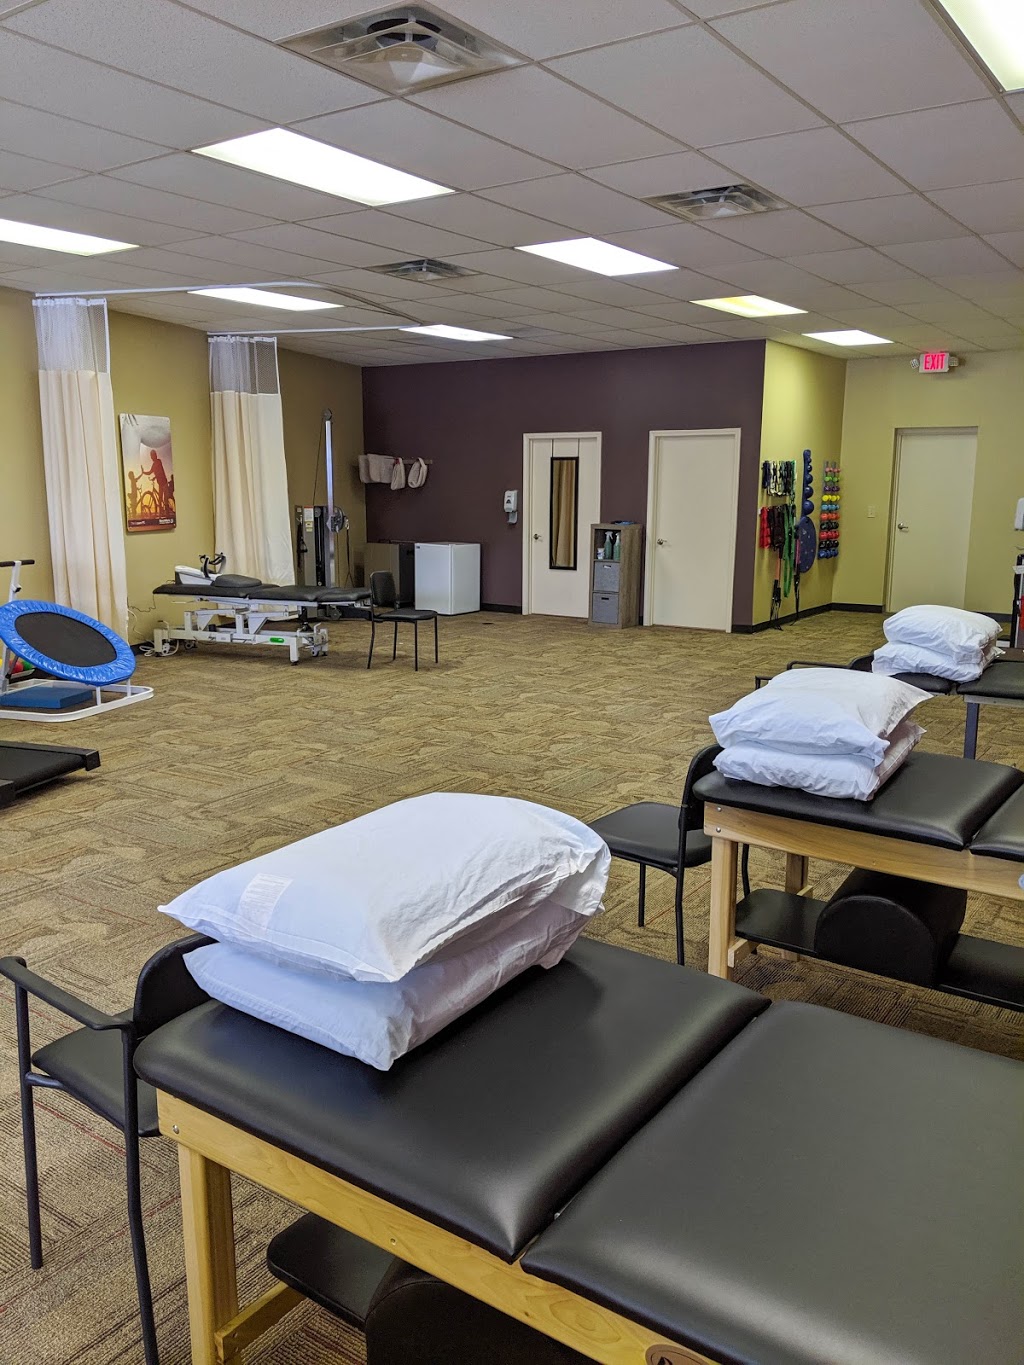 BenchMark Physical Therapy | 603 Highland St, Mt Holly, NC 28120, USA | Phone: (980) 277-8916